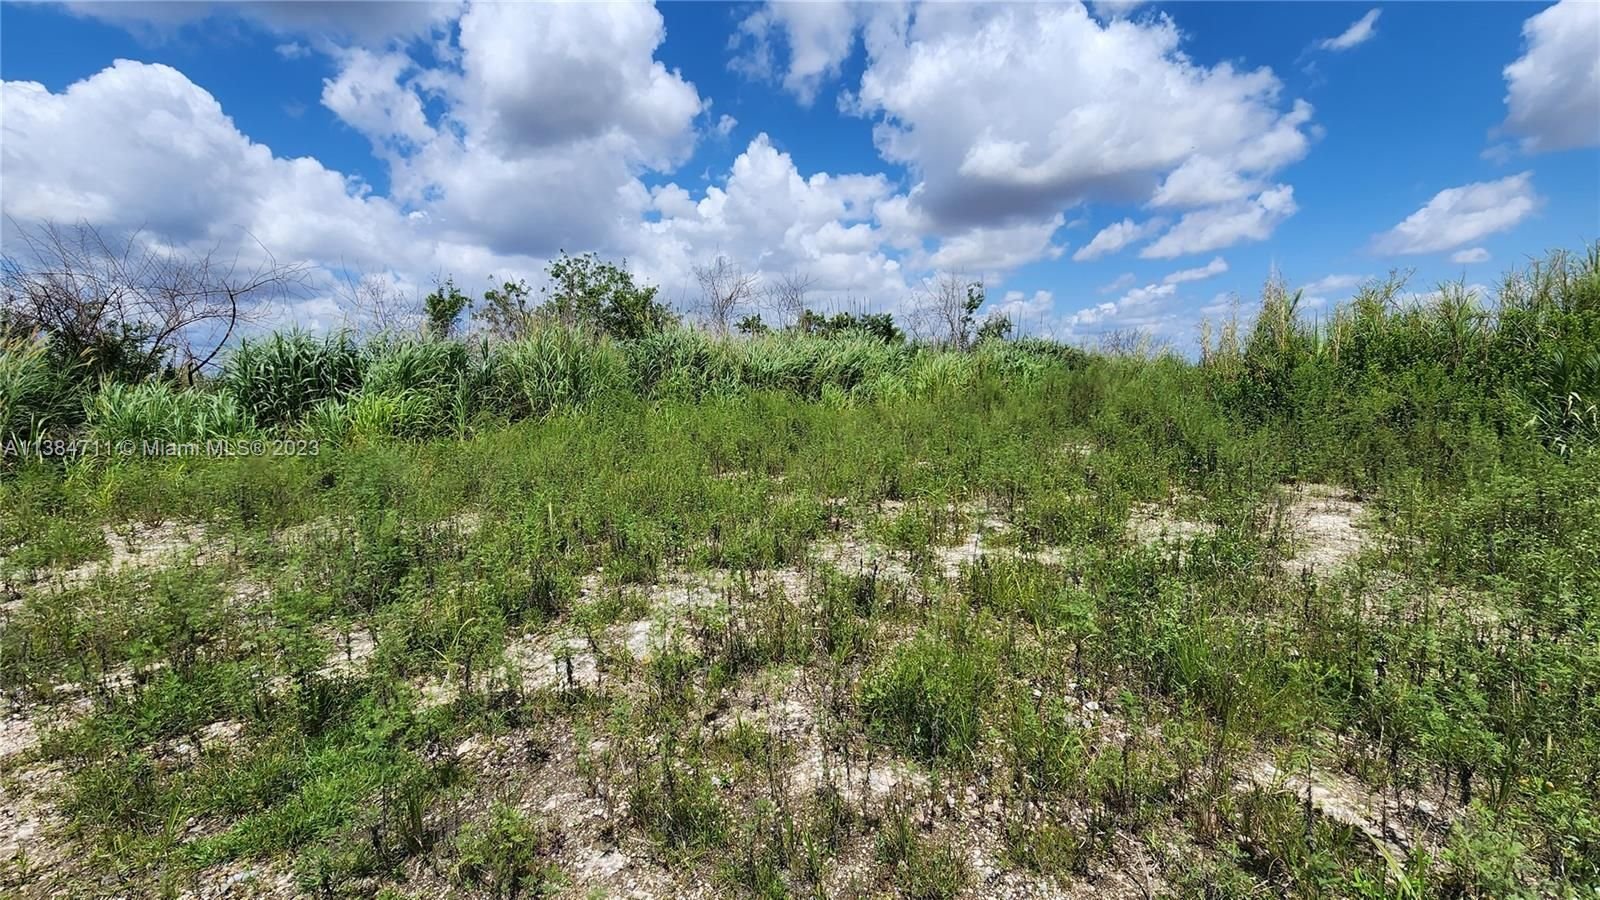 Real estate property located at W223FT OF S329.80FT, Miami-Dade County, Unincorporated Dade County, FL